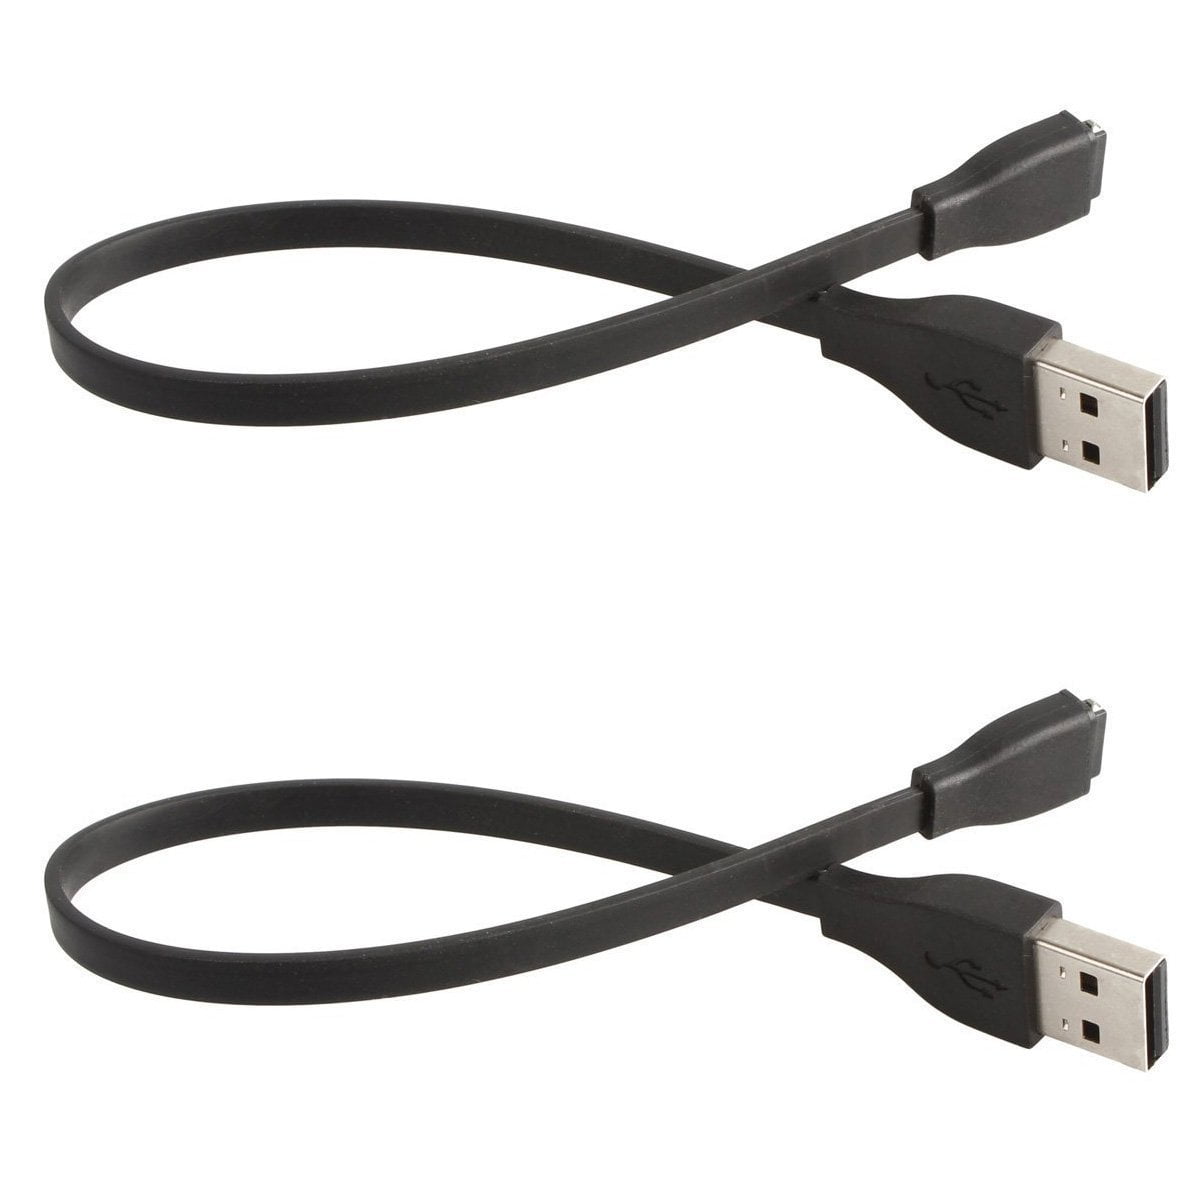 Band USB Charging Cable Cord For Fit Bit Charge/Force Bracelet Wristband Charger 